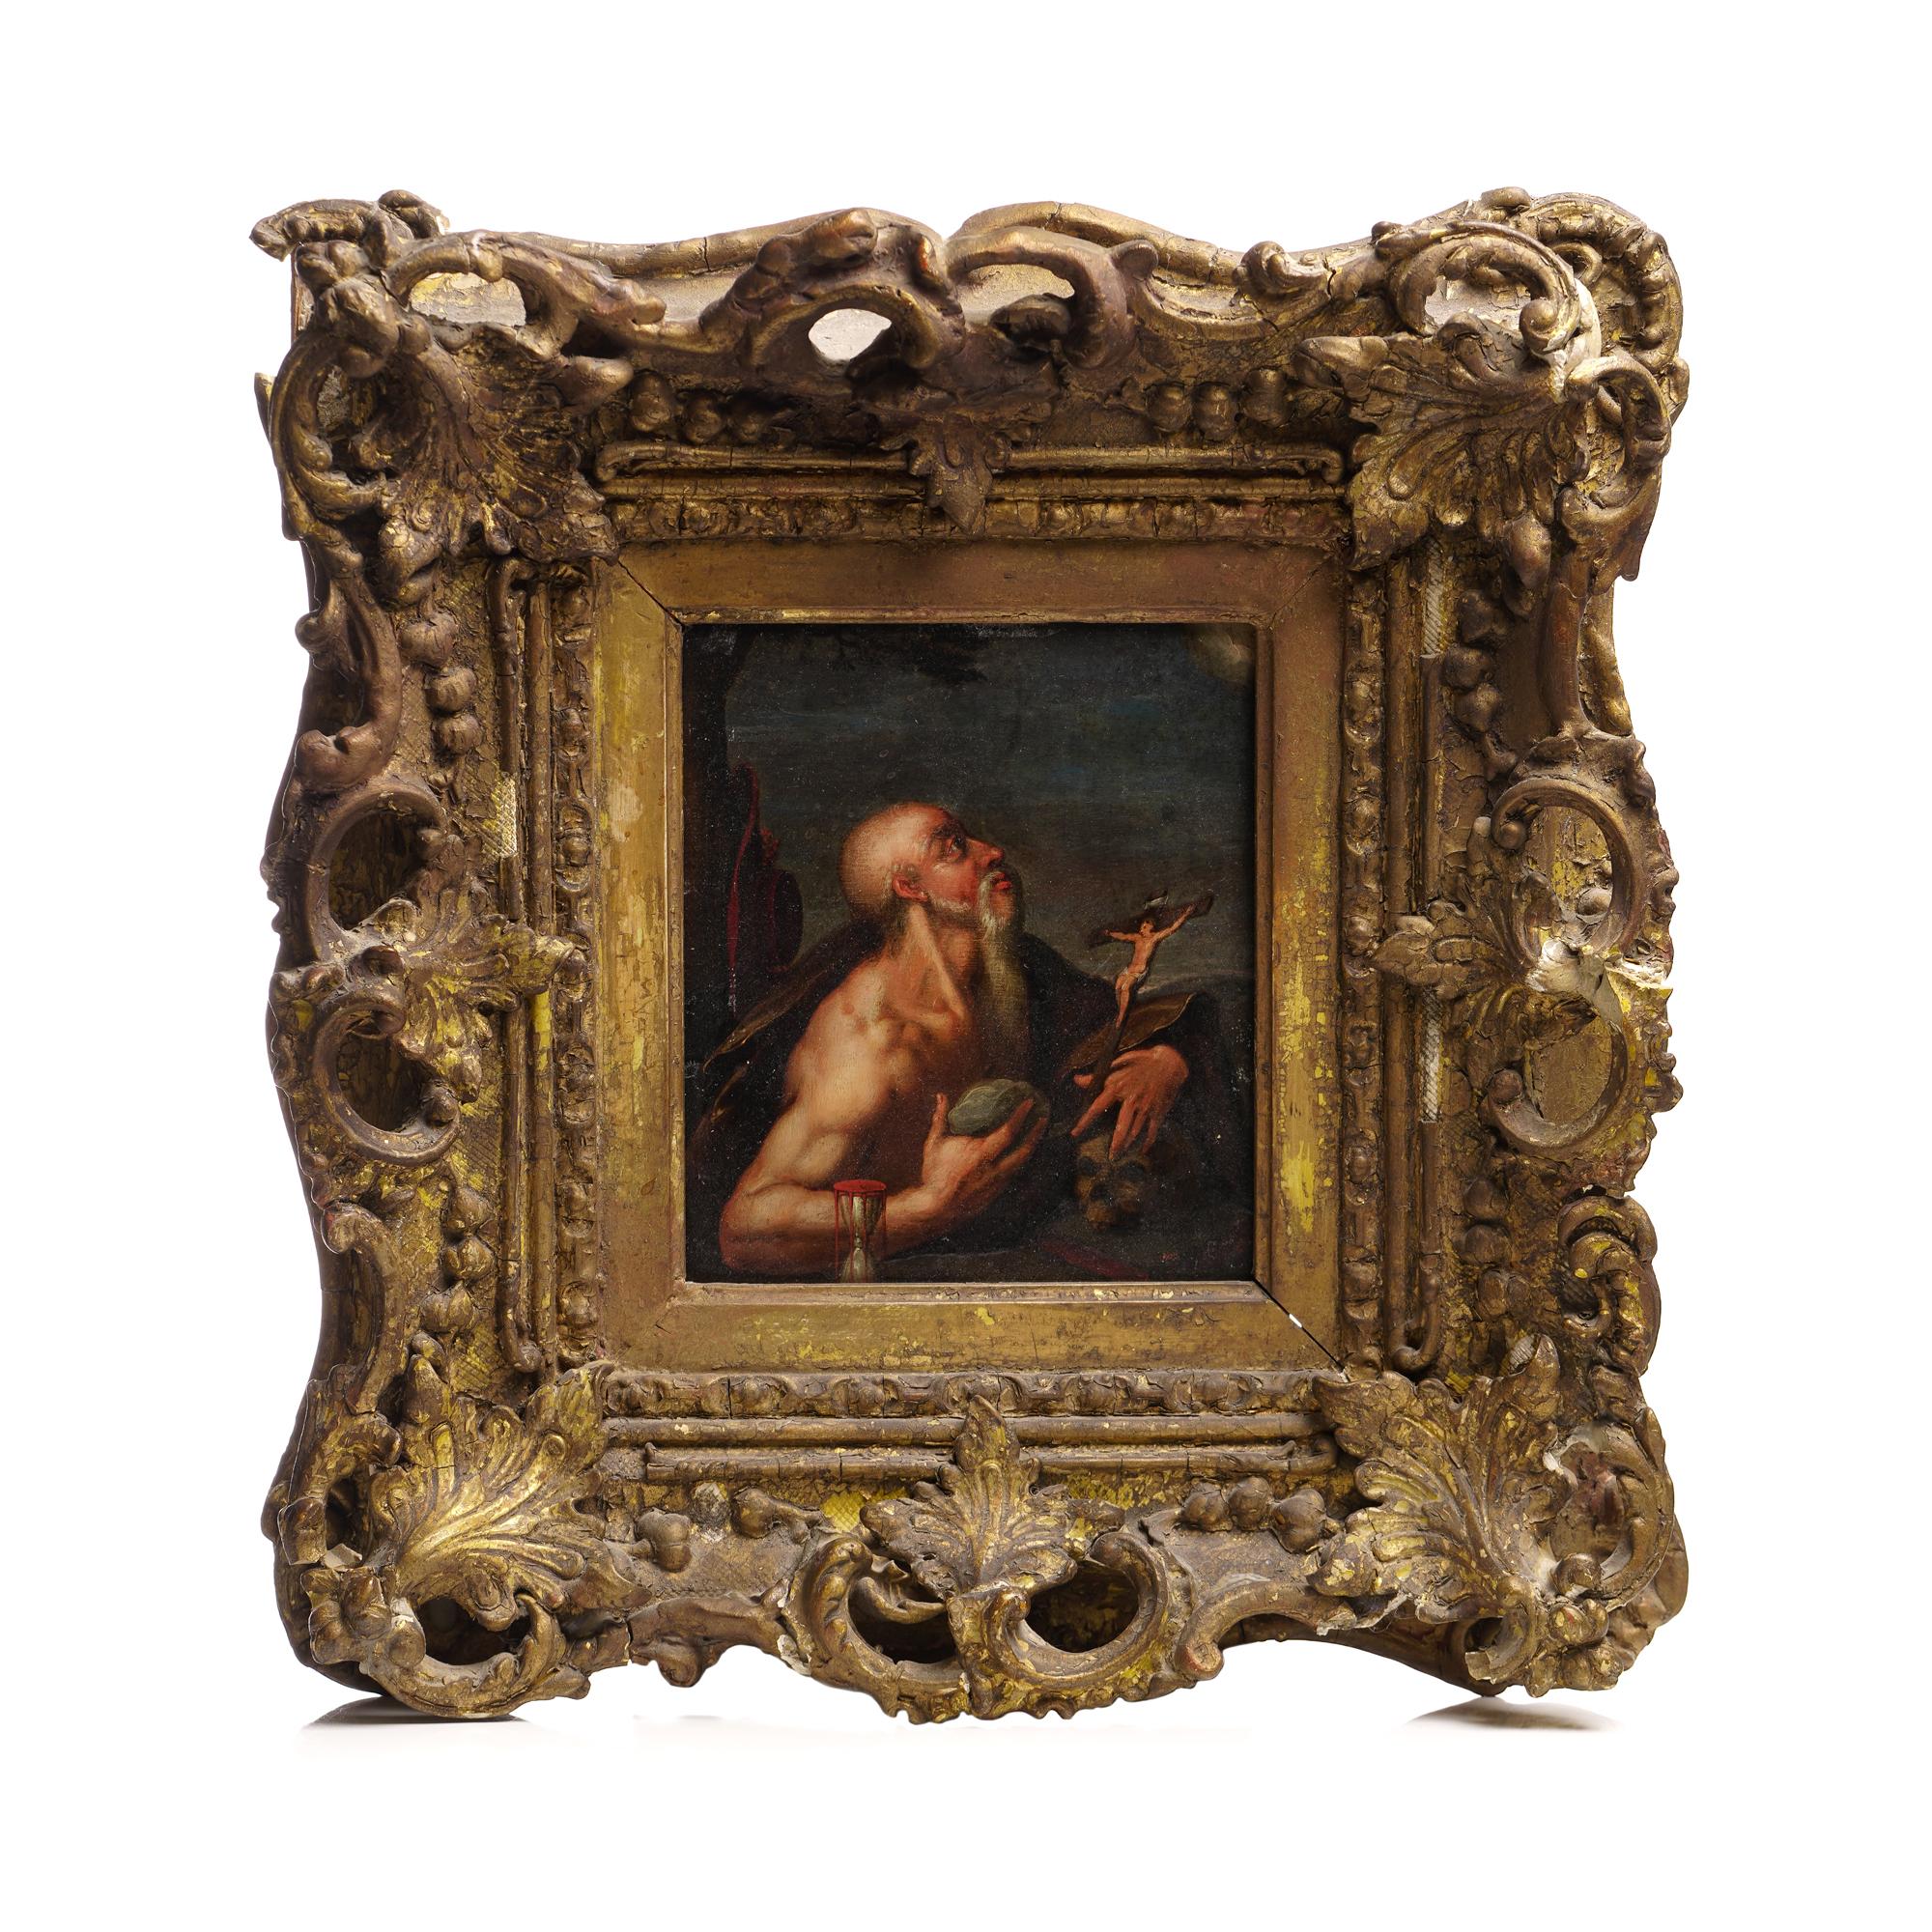 In this antique 17th-century oil painting on copper, we see St. Jerome, encased within an intricately adorned wooden frame. Jerome assumes the role of a penitent, deeply engrossed in meditation while fixating on a crucifix. A striking detail reveals